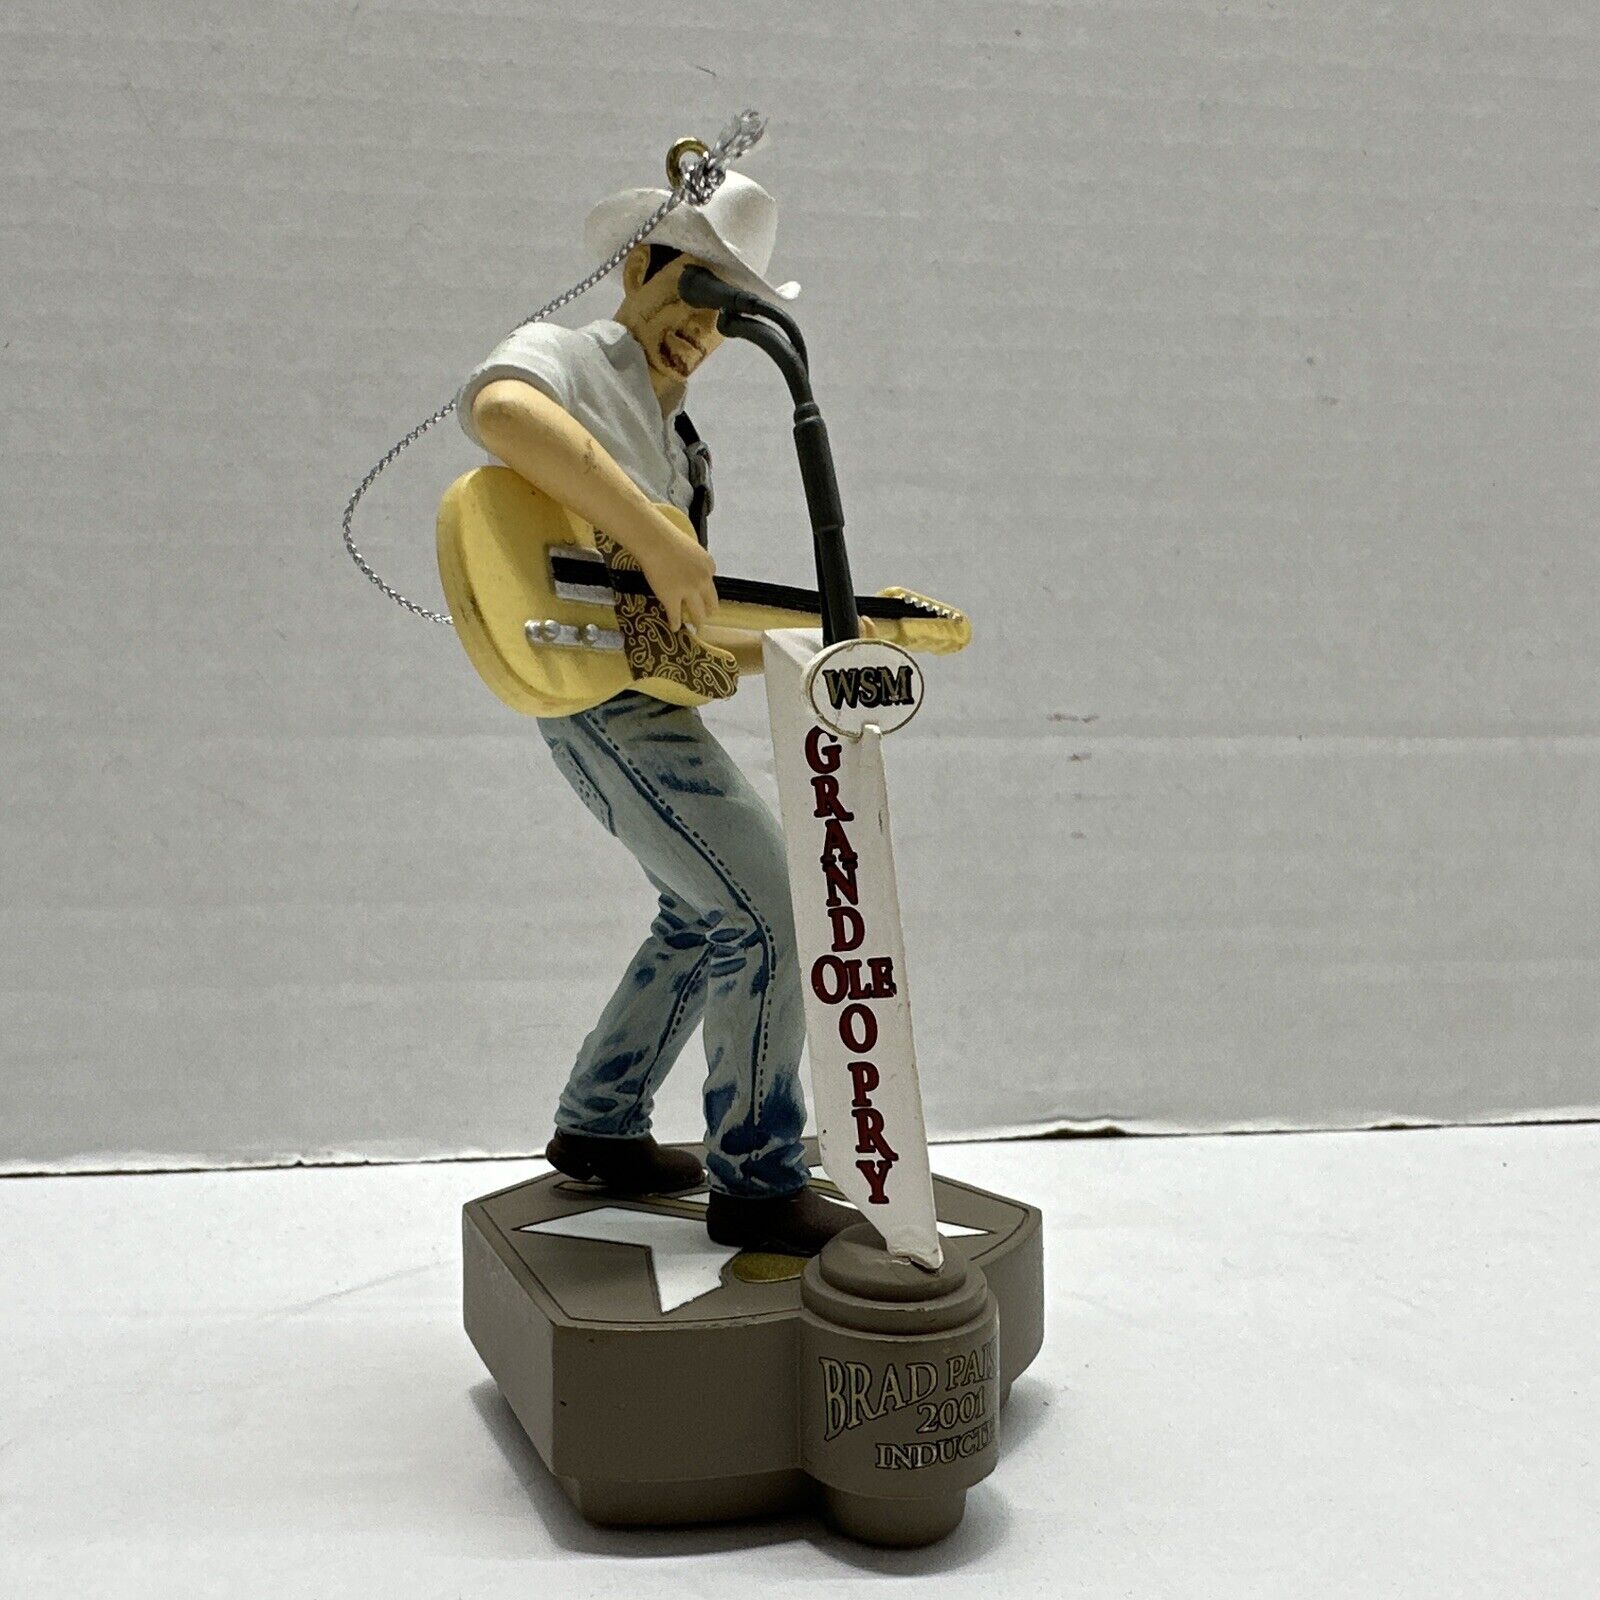 2010 GRAND OLE OPRY BRAD PAISLEY ORNAMENT MUSICAL HEIRLOOM COLLECTION